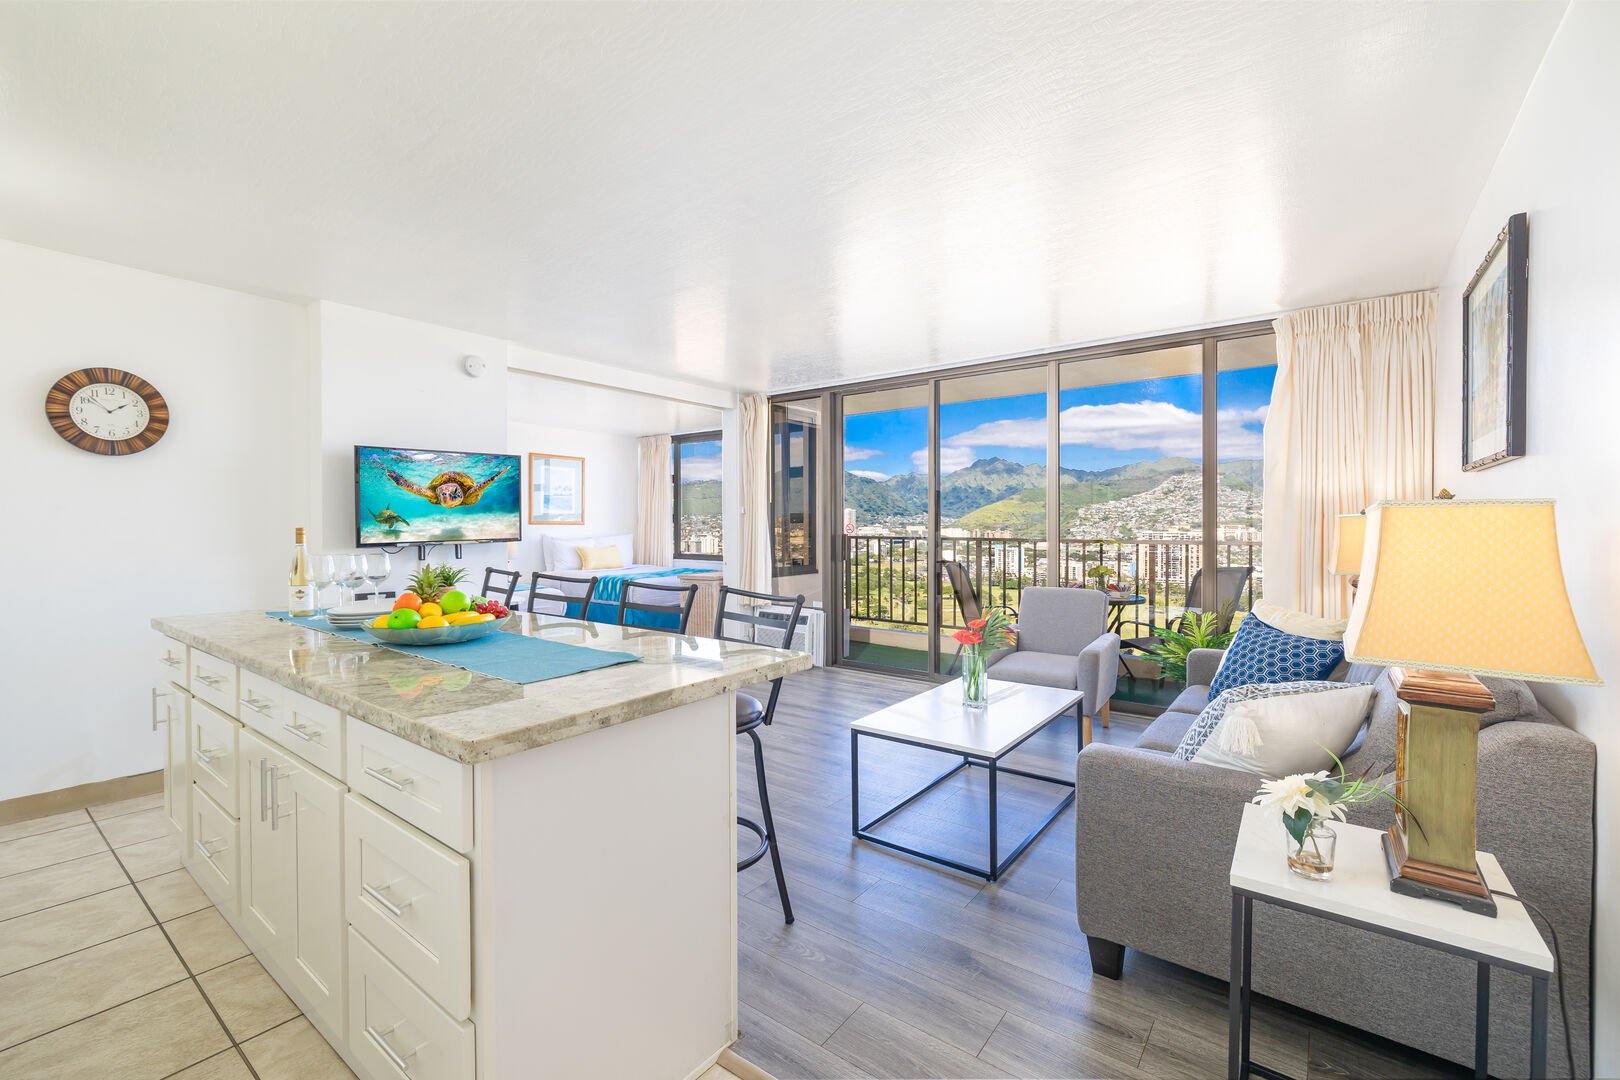 Beautiful 1-bedroom unit with panoramic mountain views from the living room!